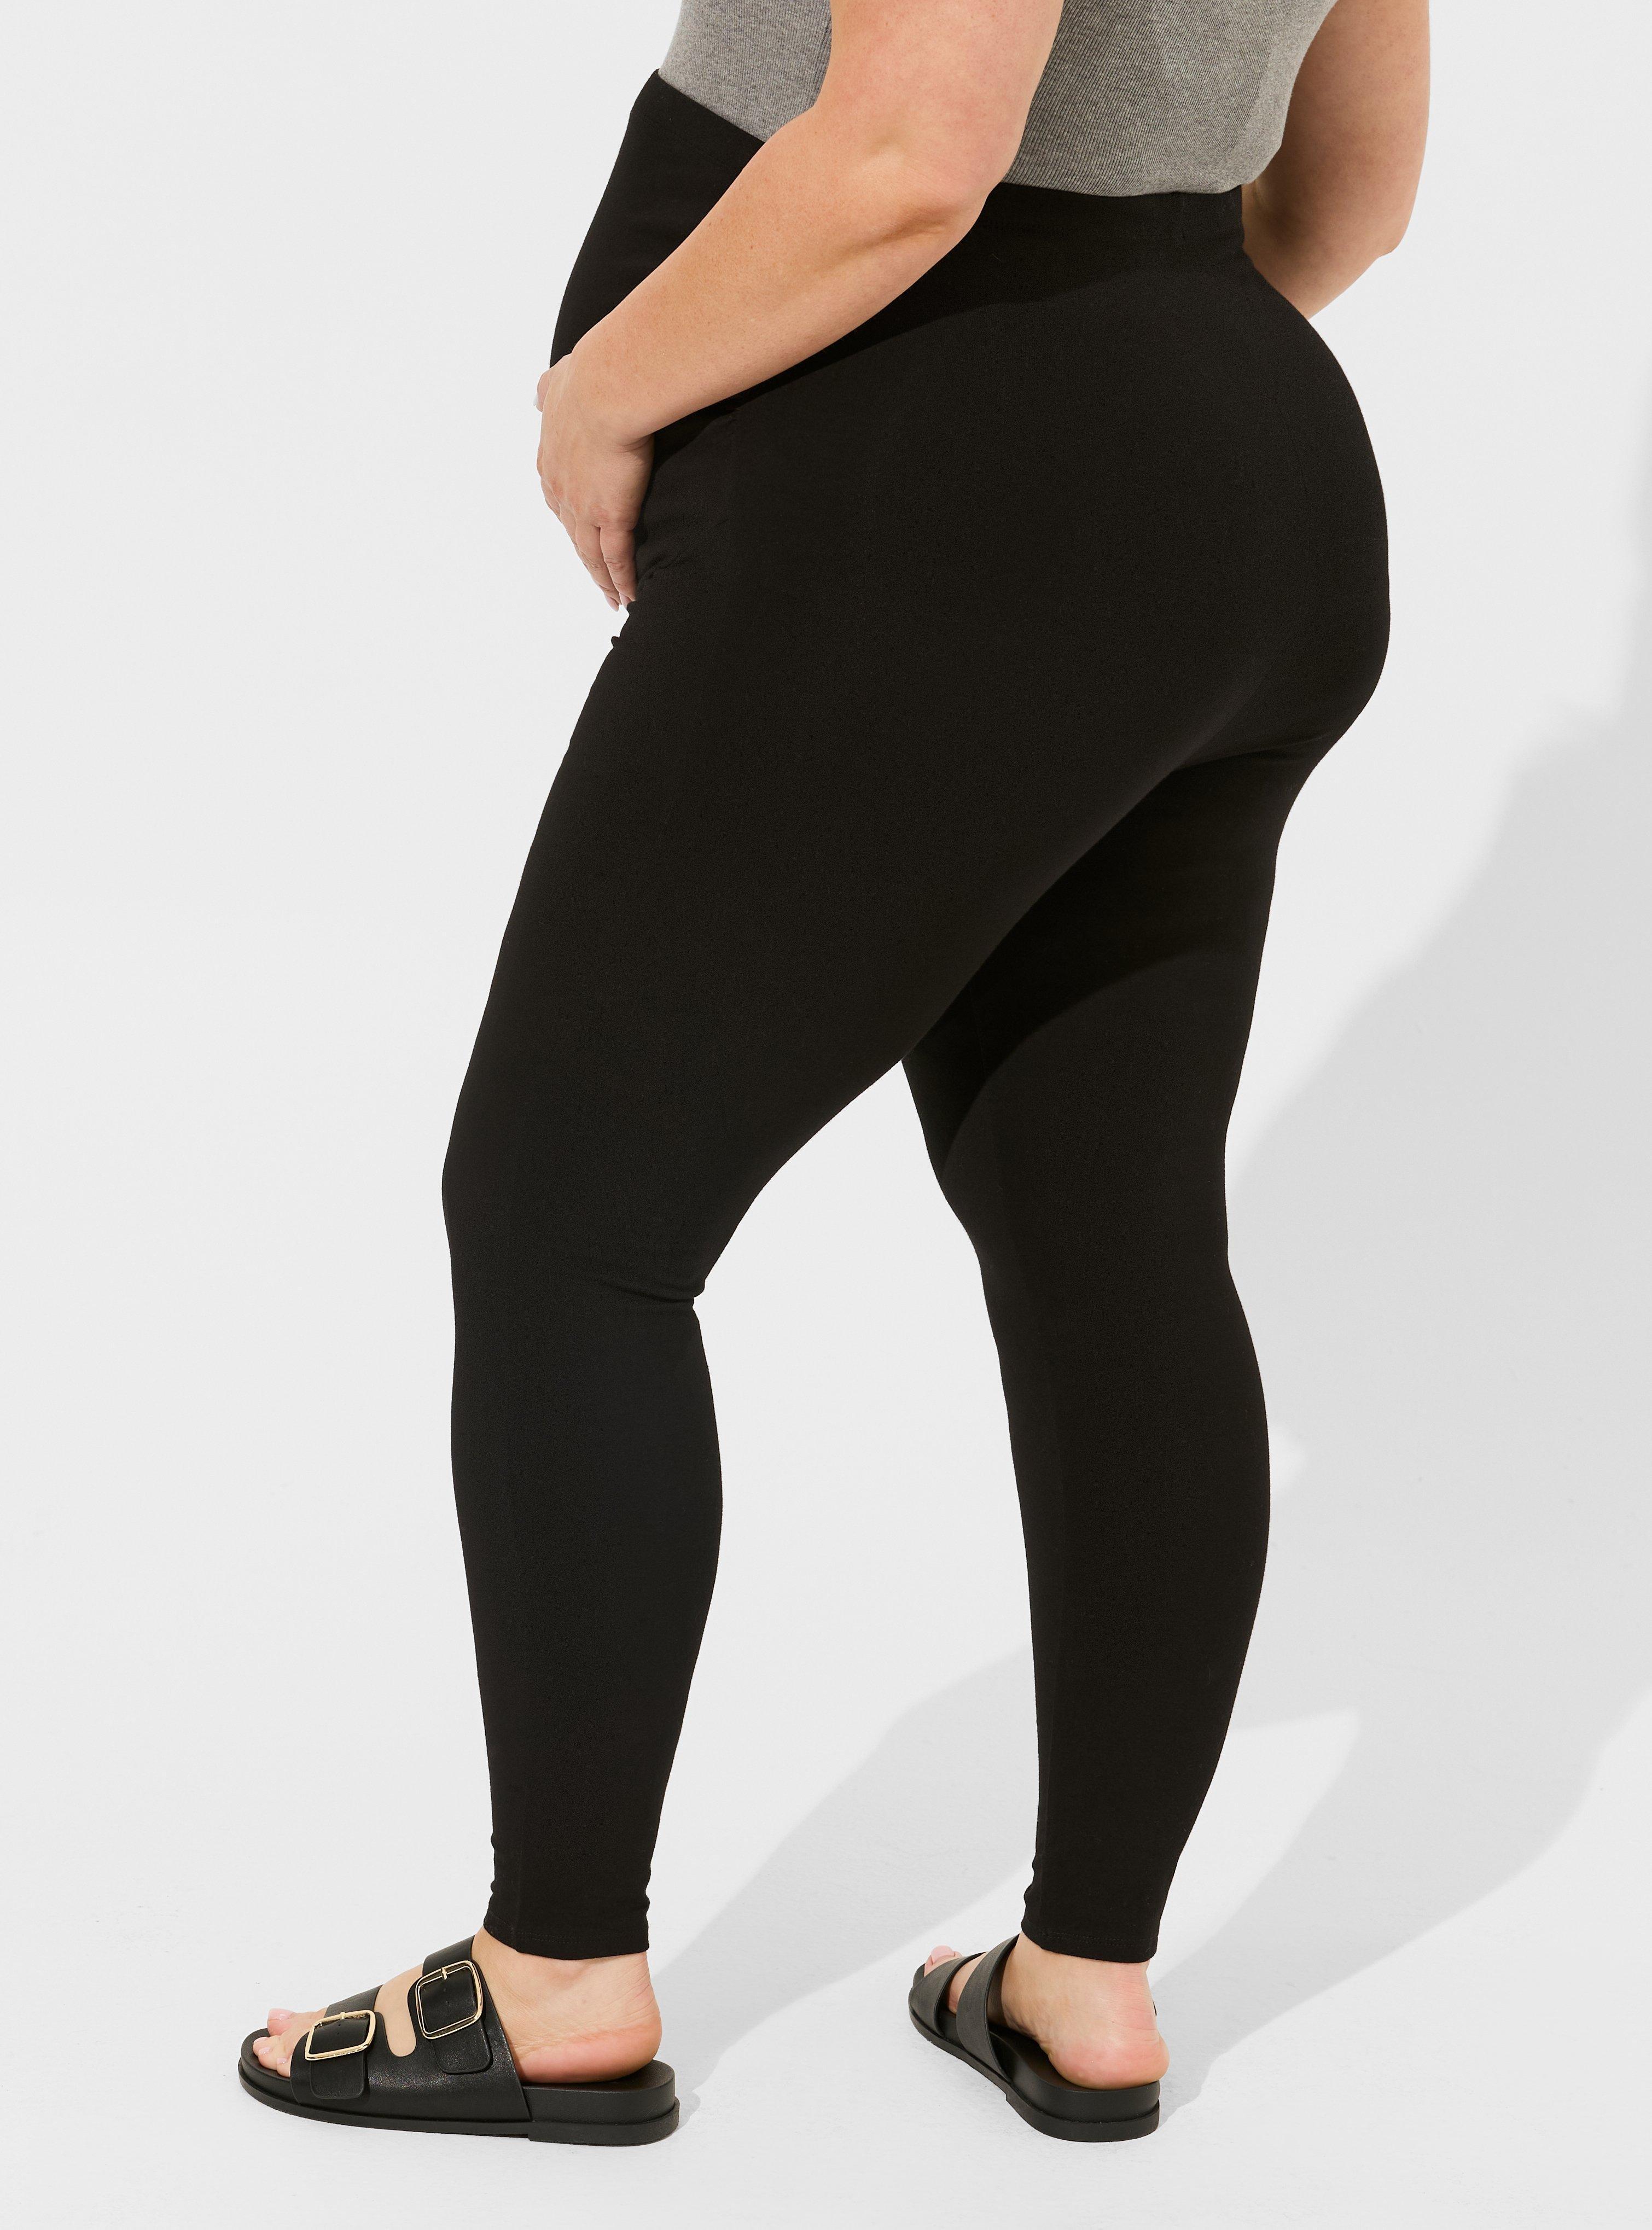 Leggings for Women UK Plus Size 18 Stretch Sports High Bottoms